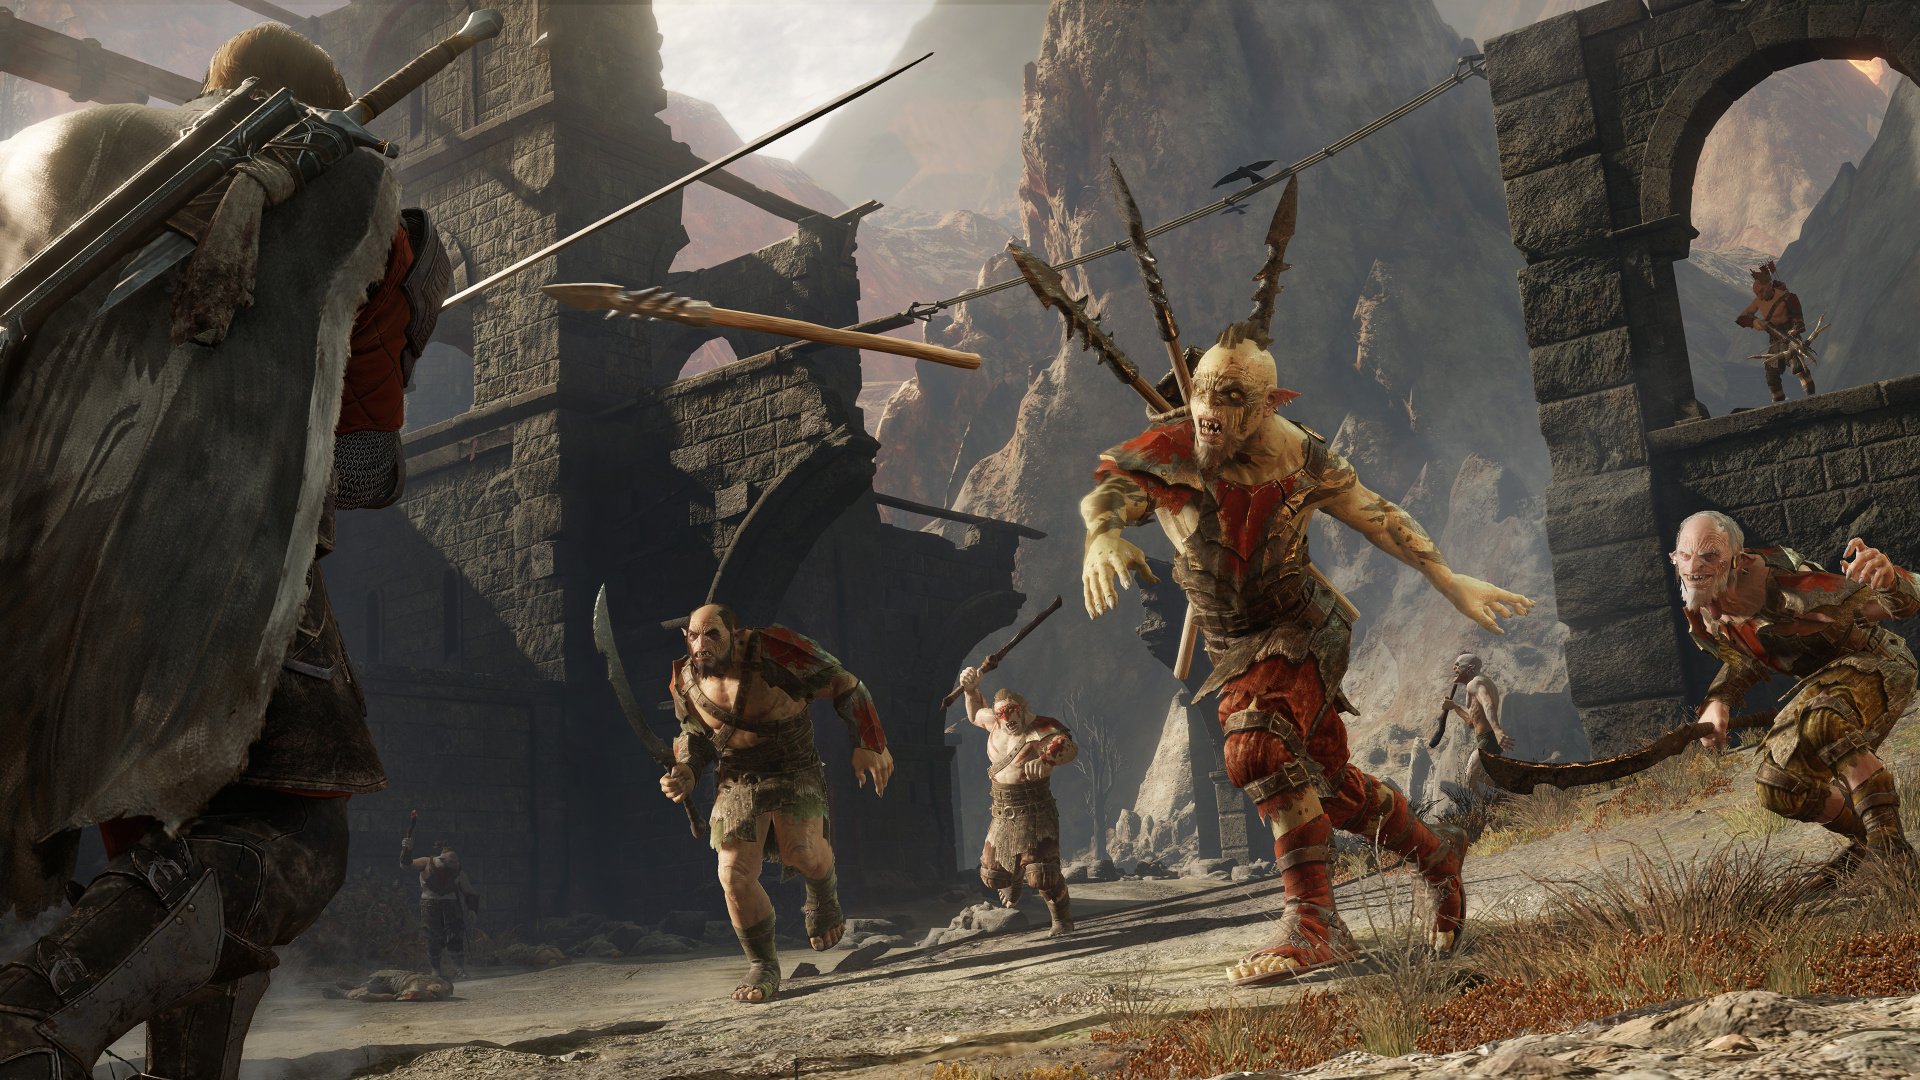 Monolith Discusses Potential For Middle-Earth: Shadow of Mordor 2